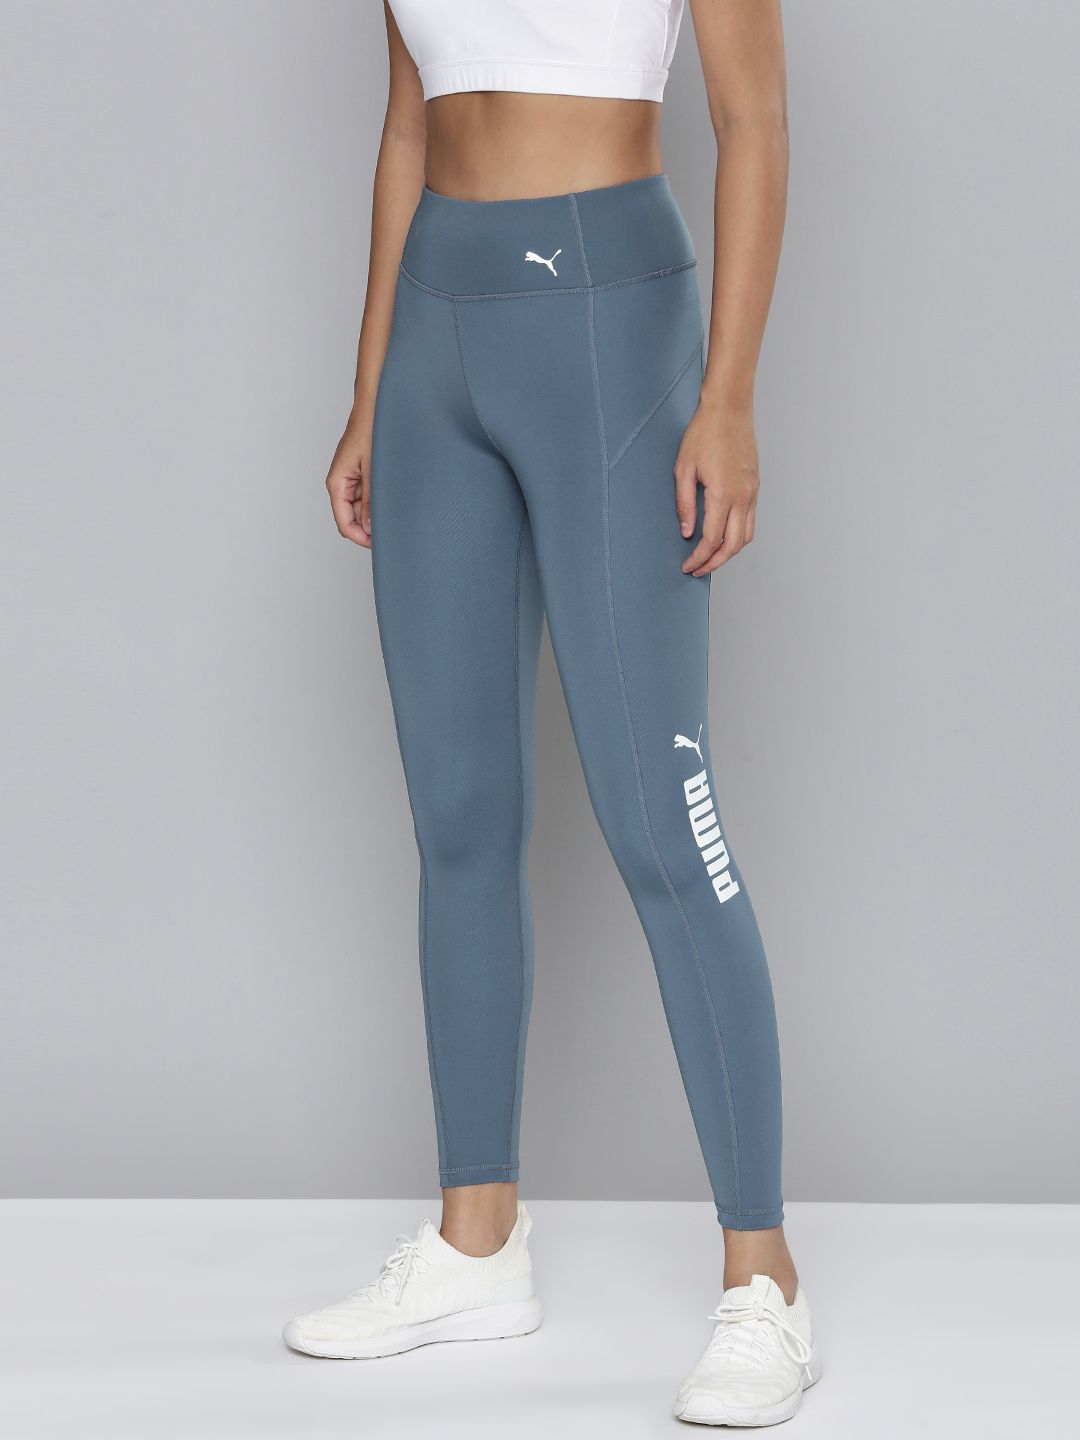 Puma Women Grey Logo Printed dryCELL Train All Day 7/8 Training Tights Price in India